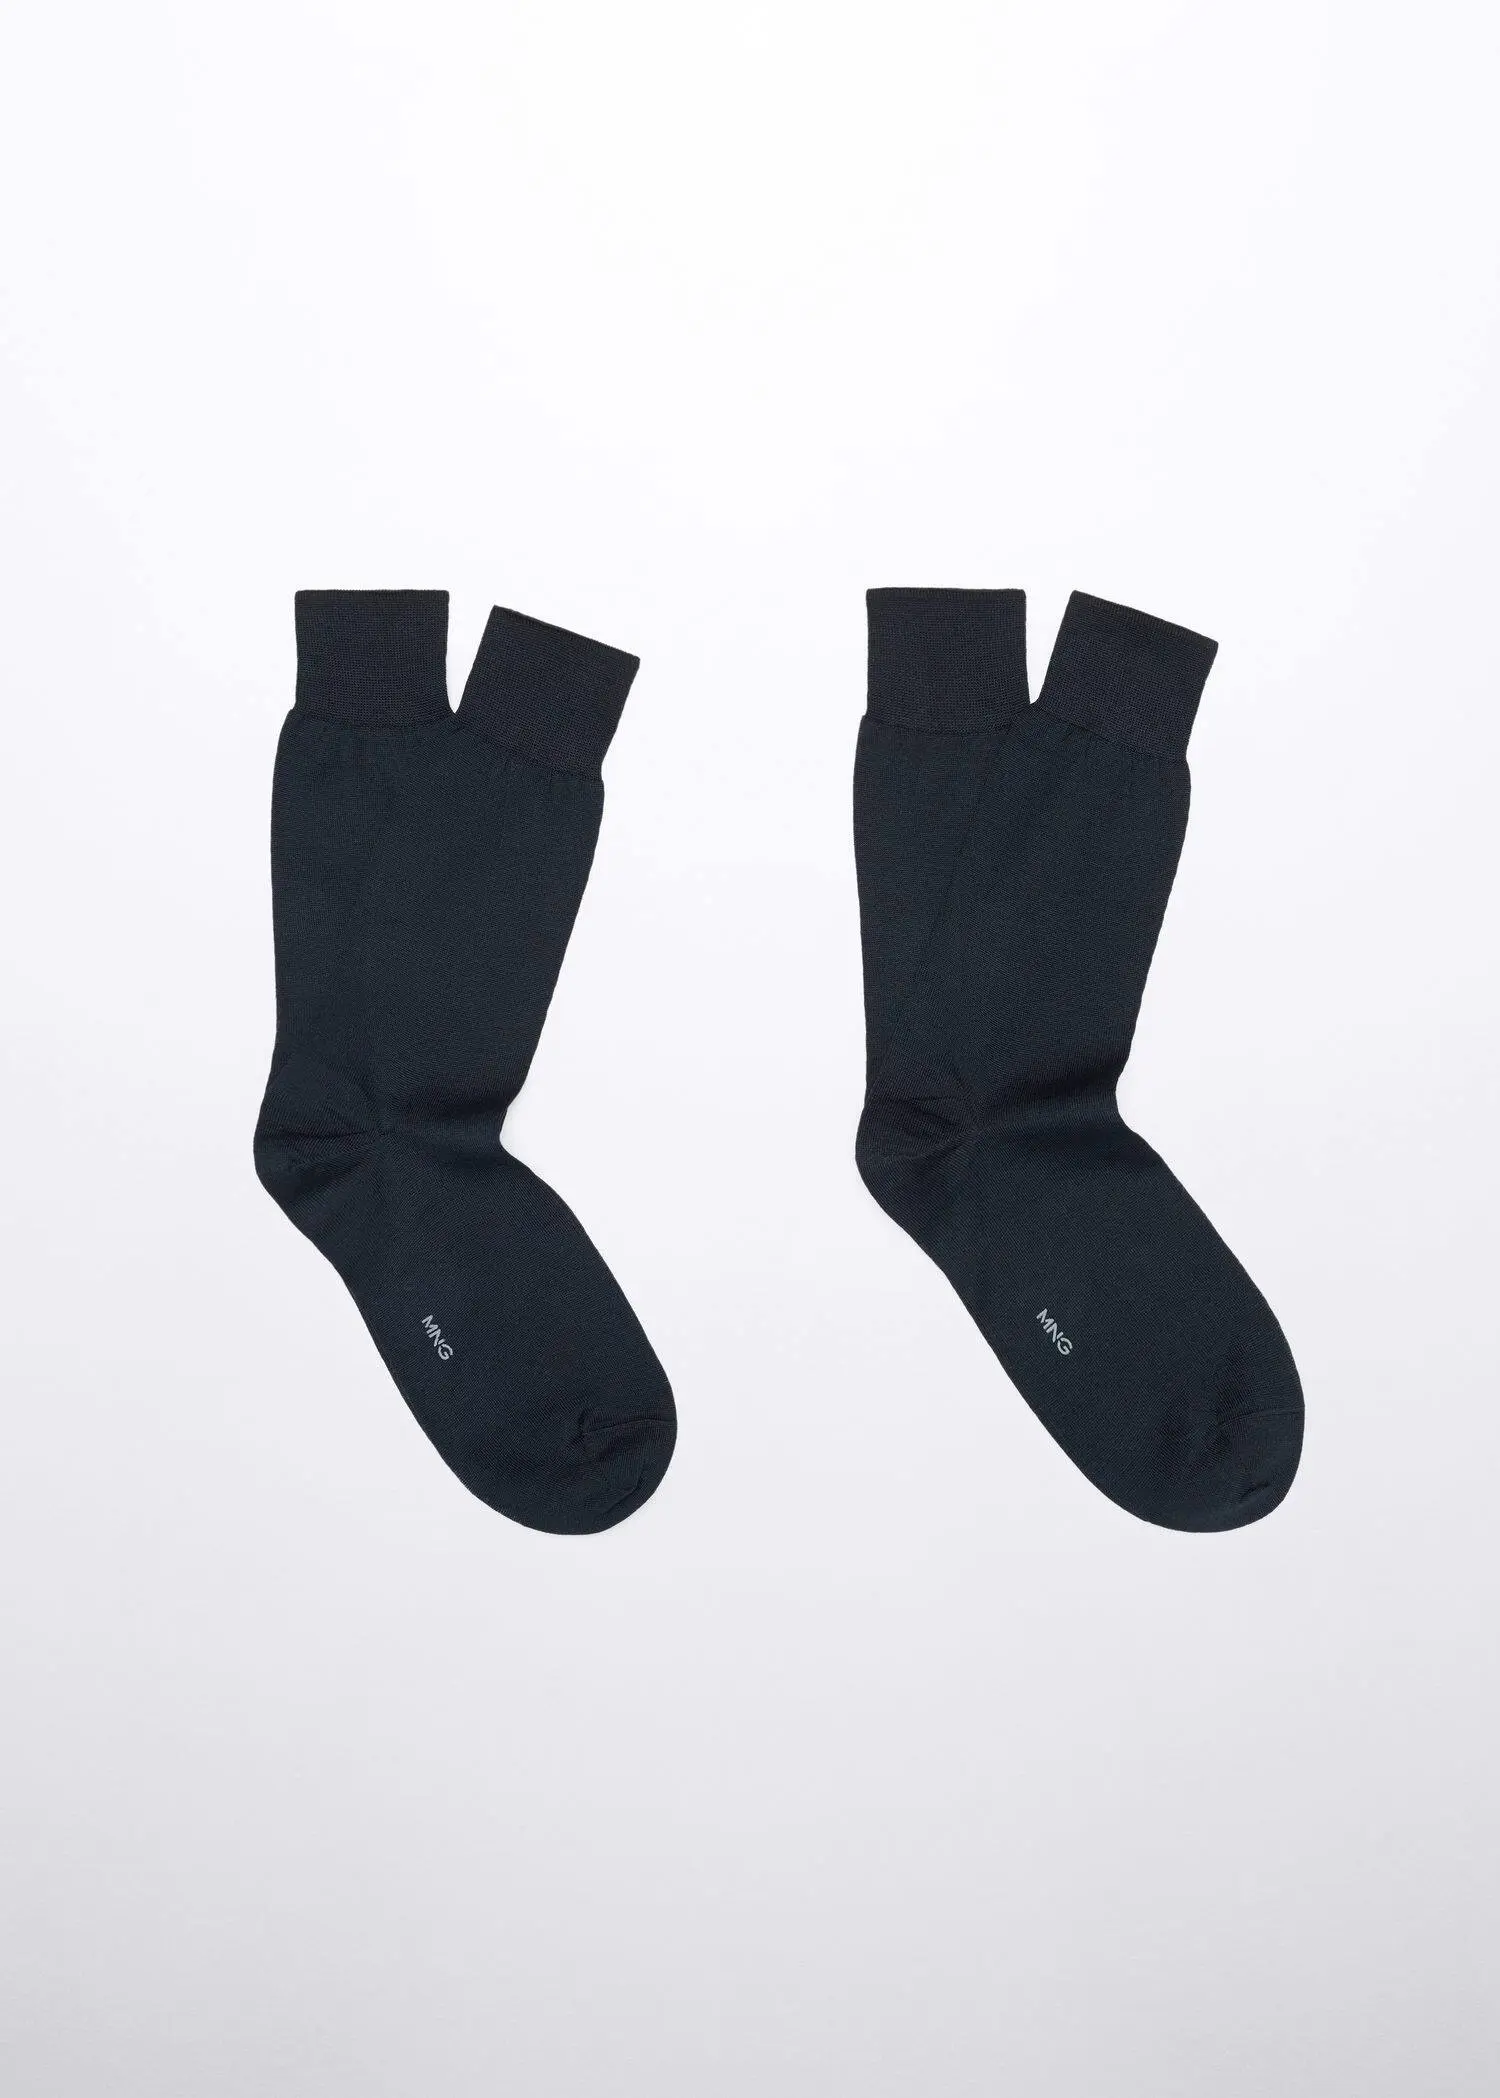 Mango 100% plain cotton socks. a pair of socks that are on the ground. 